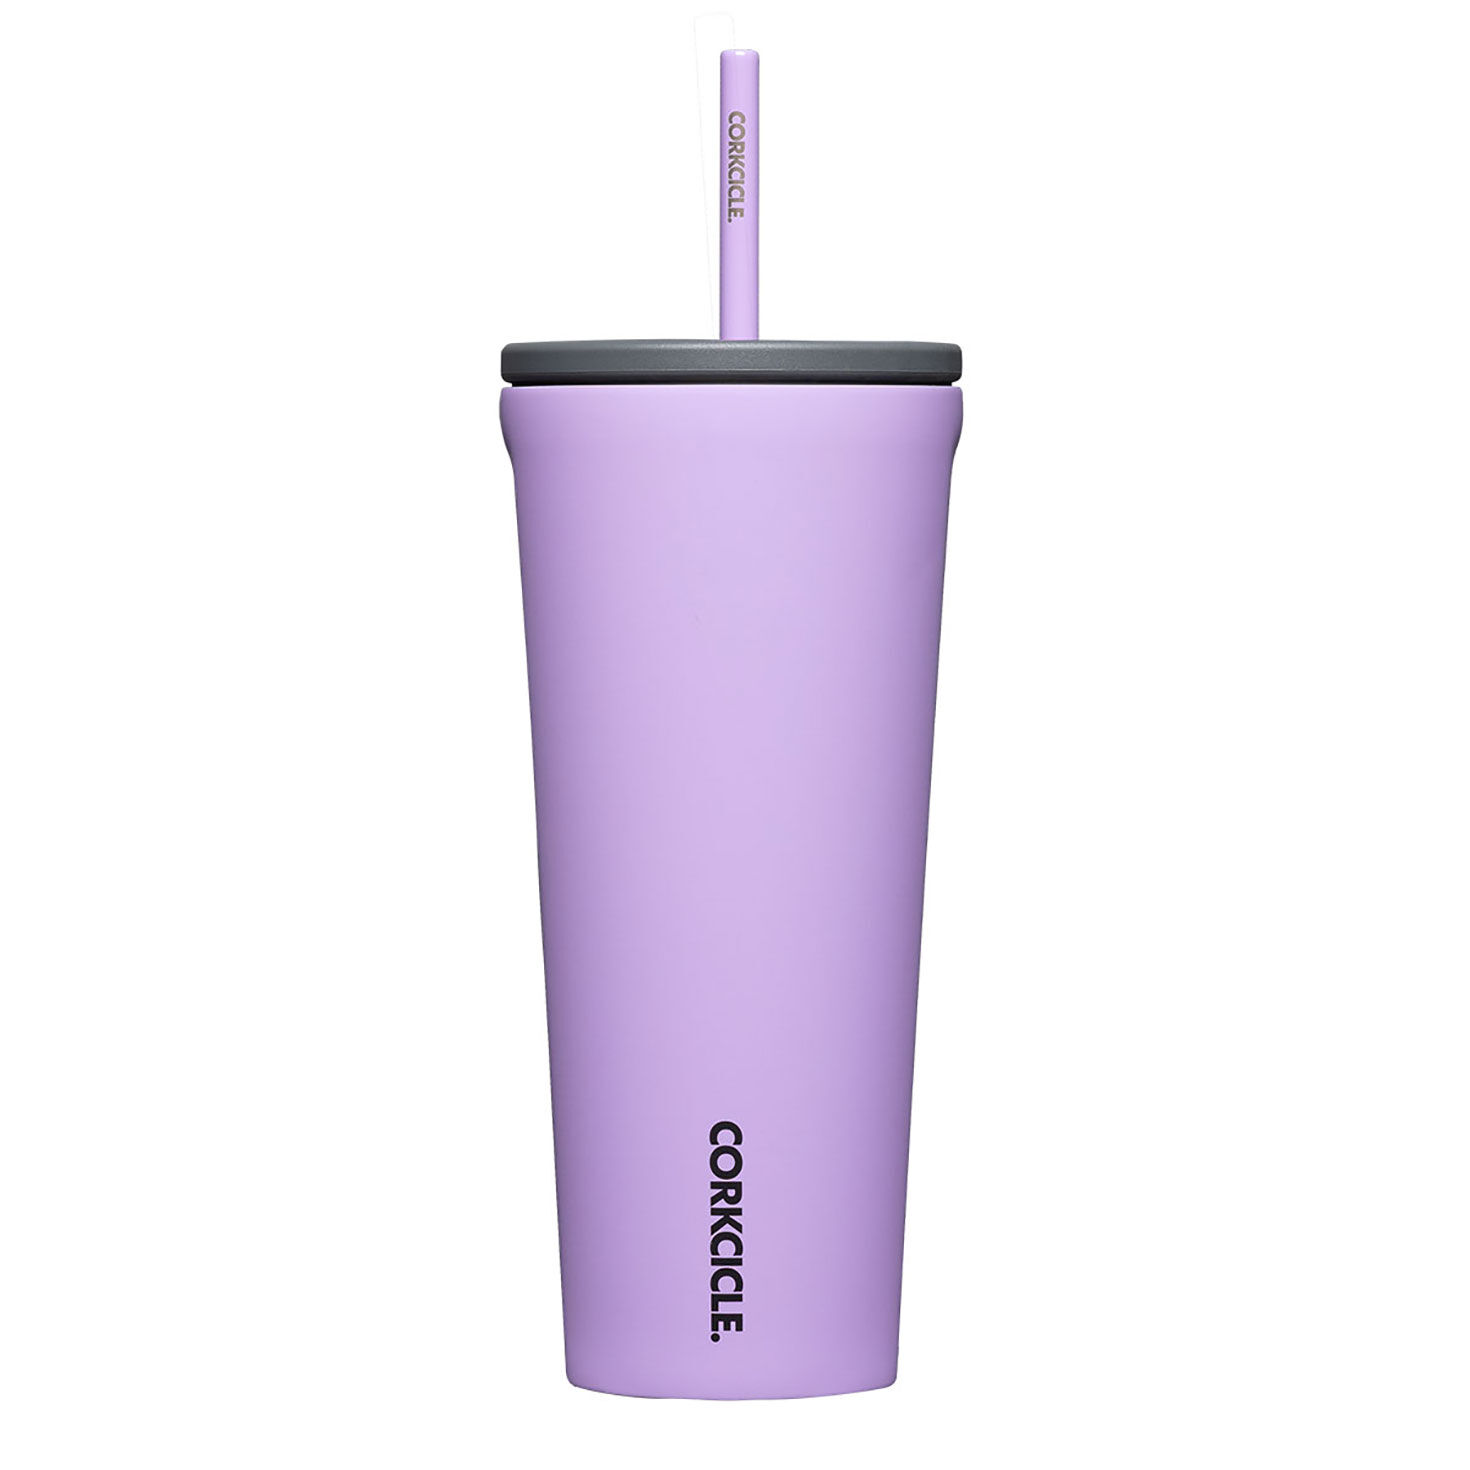 Corkcicle Sun-Soaked Lilac Stainless Steel Tumbler, 24oz. - Insulated  Tumblers - Hallmark